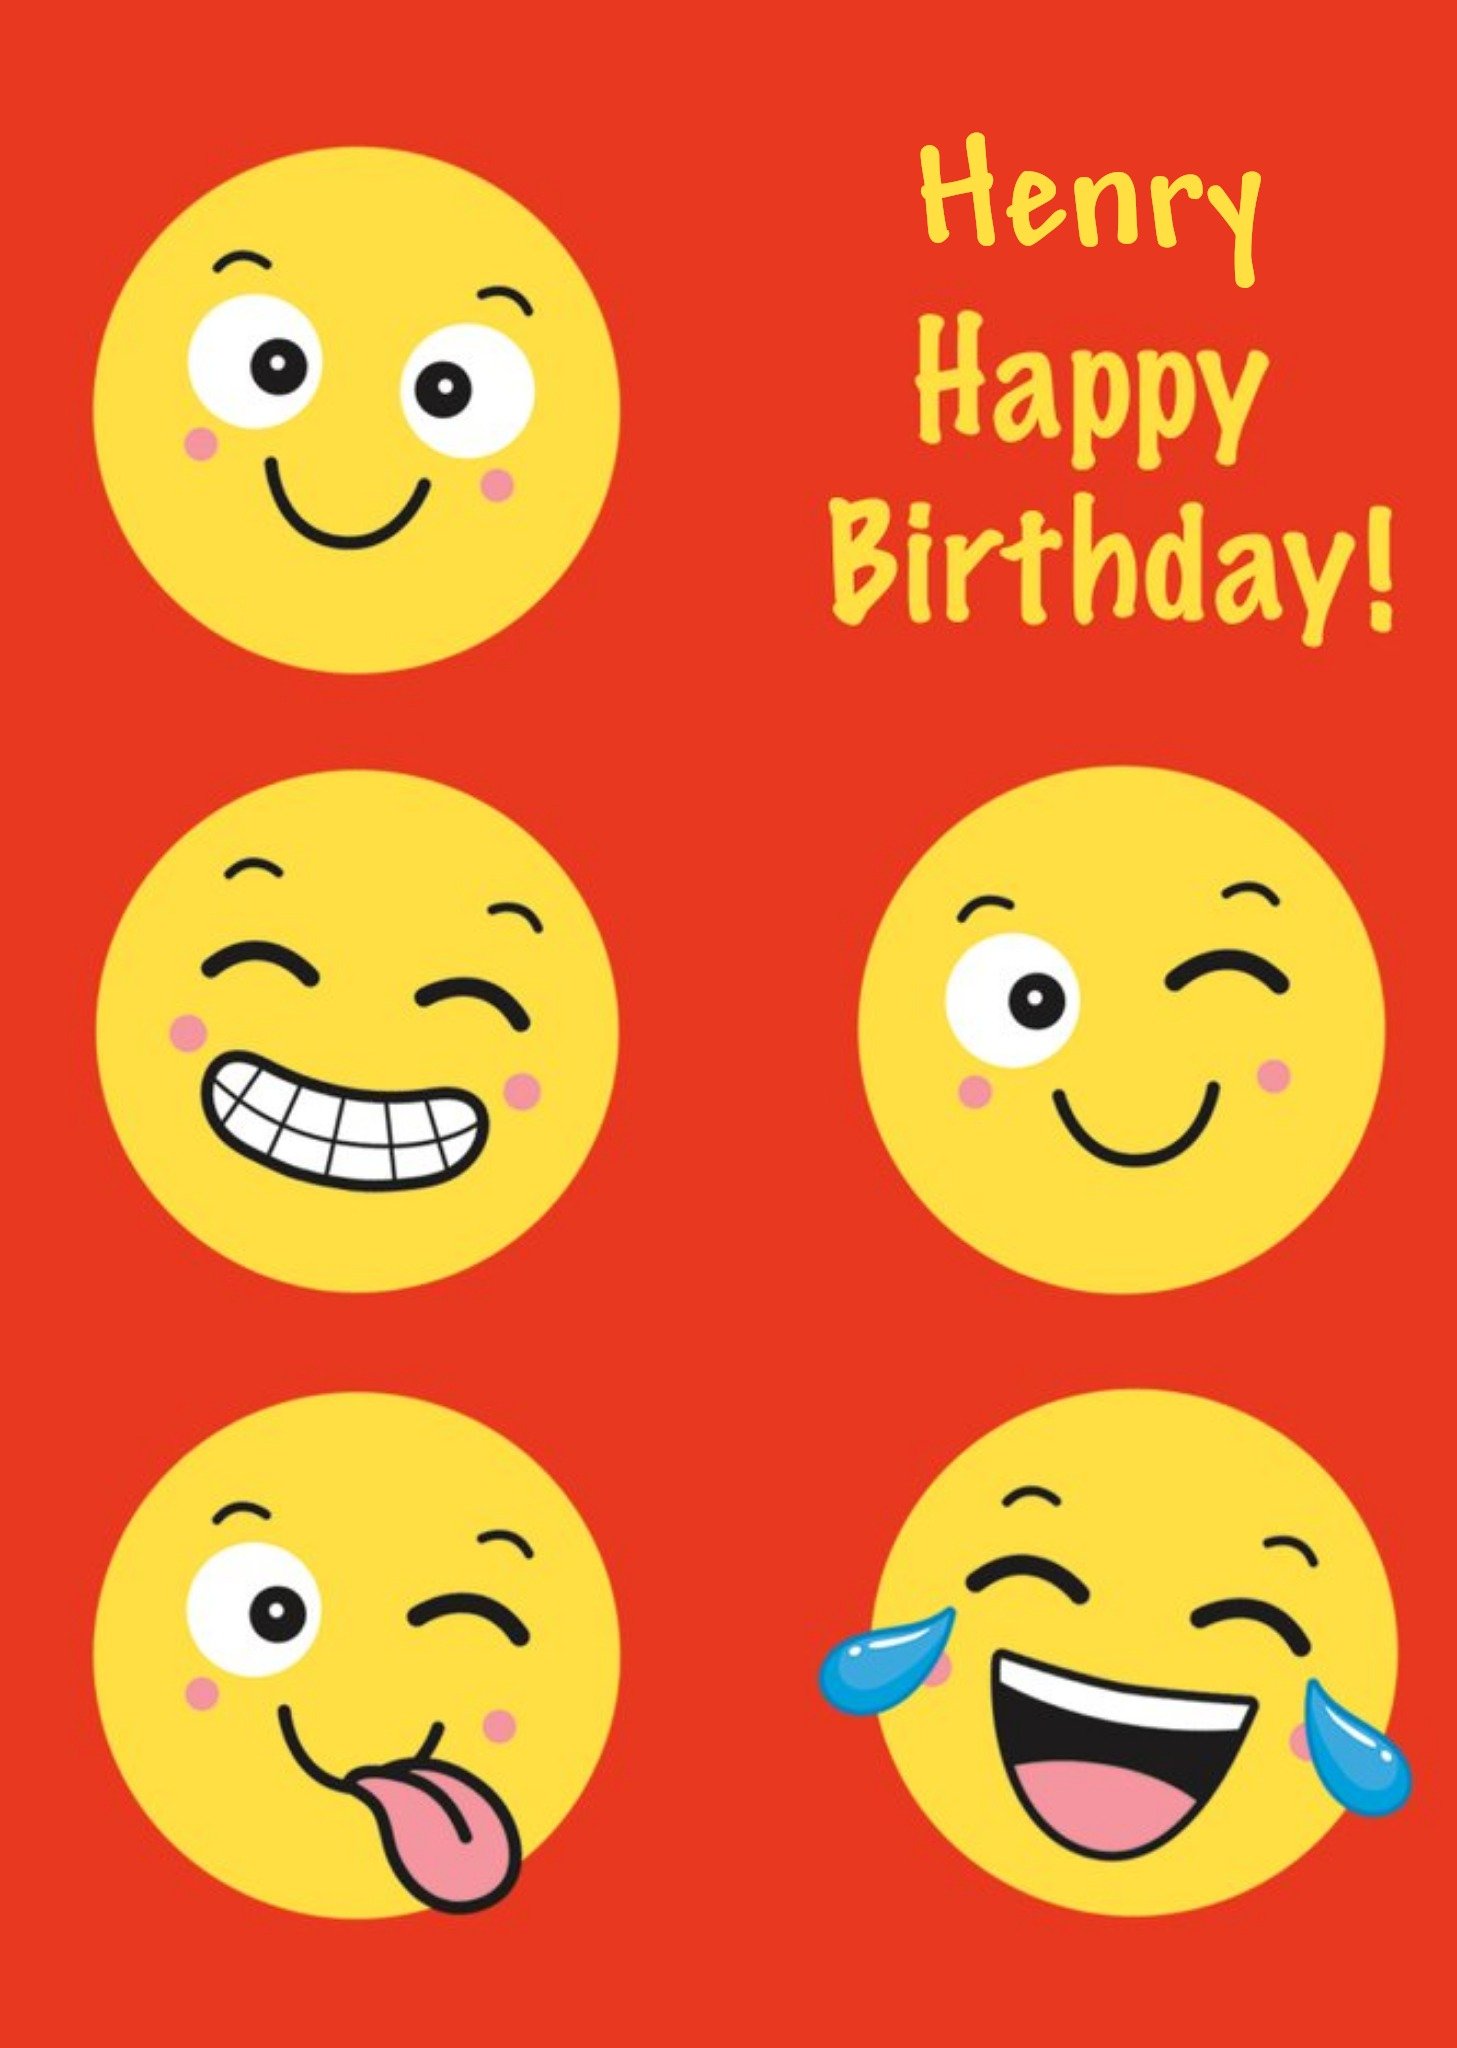 Moonpig Funny Cartoon Illustration Of Emojis On A Red Background Birthday Card, Large